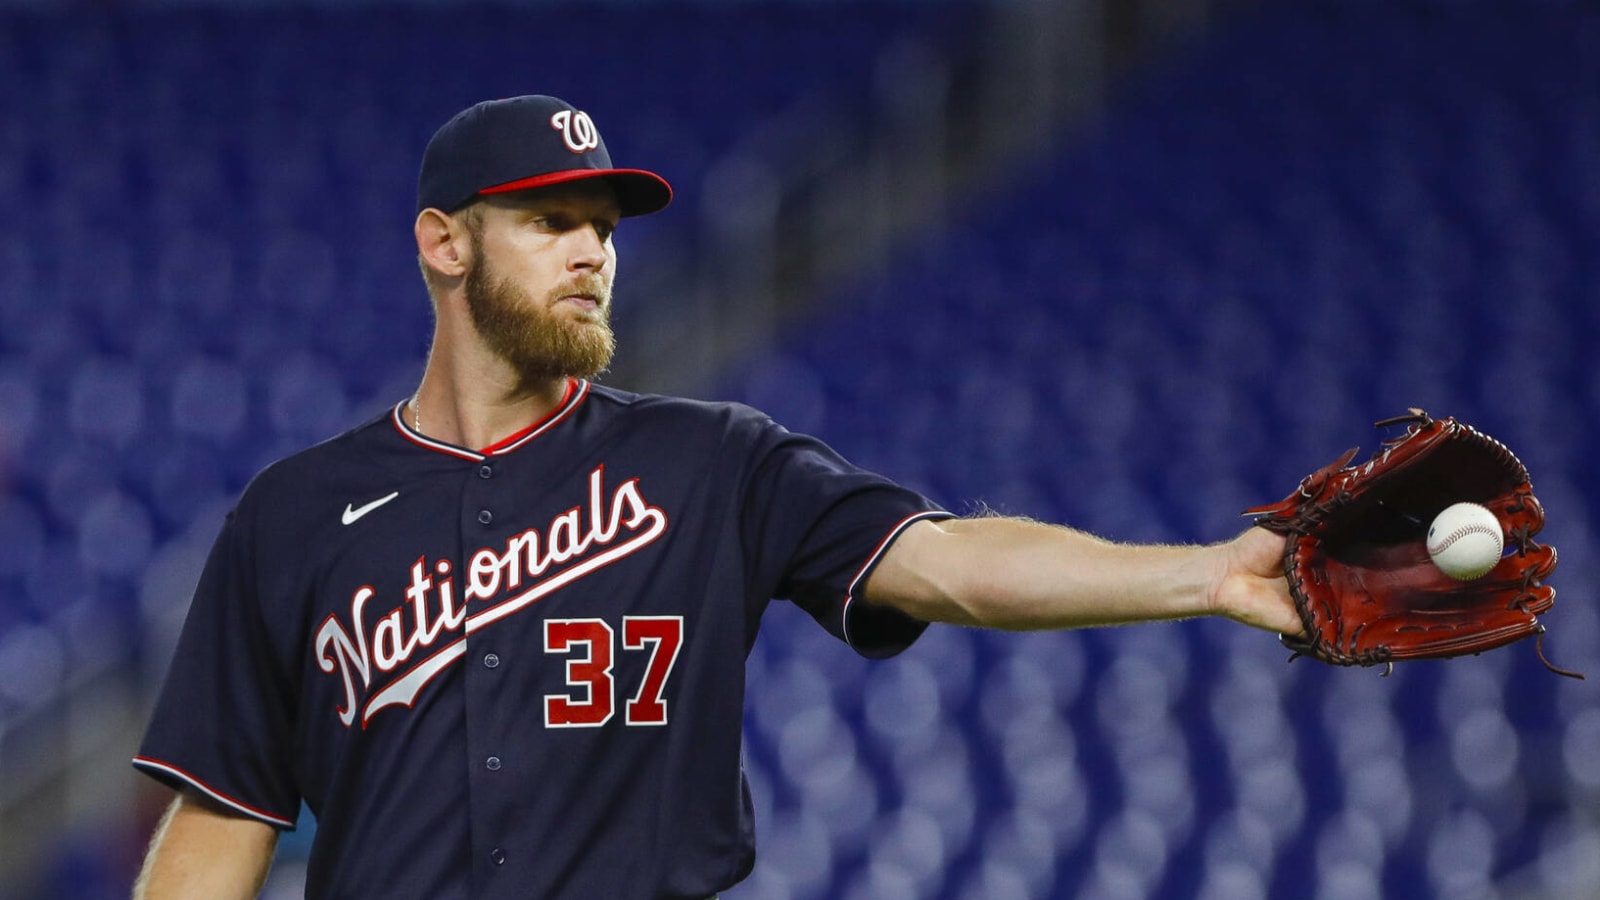 Nationals righty Stephen Strasburg's career in jeopardy